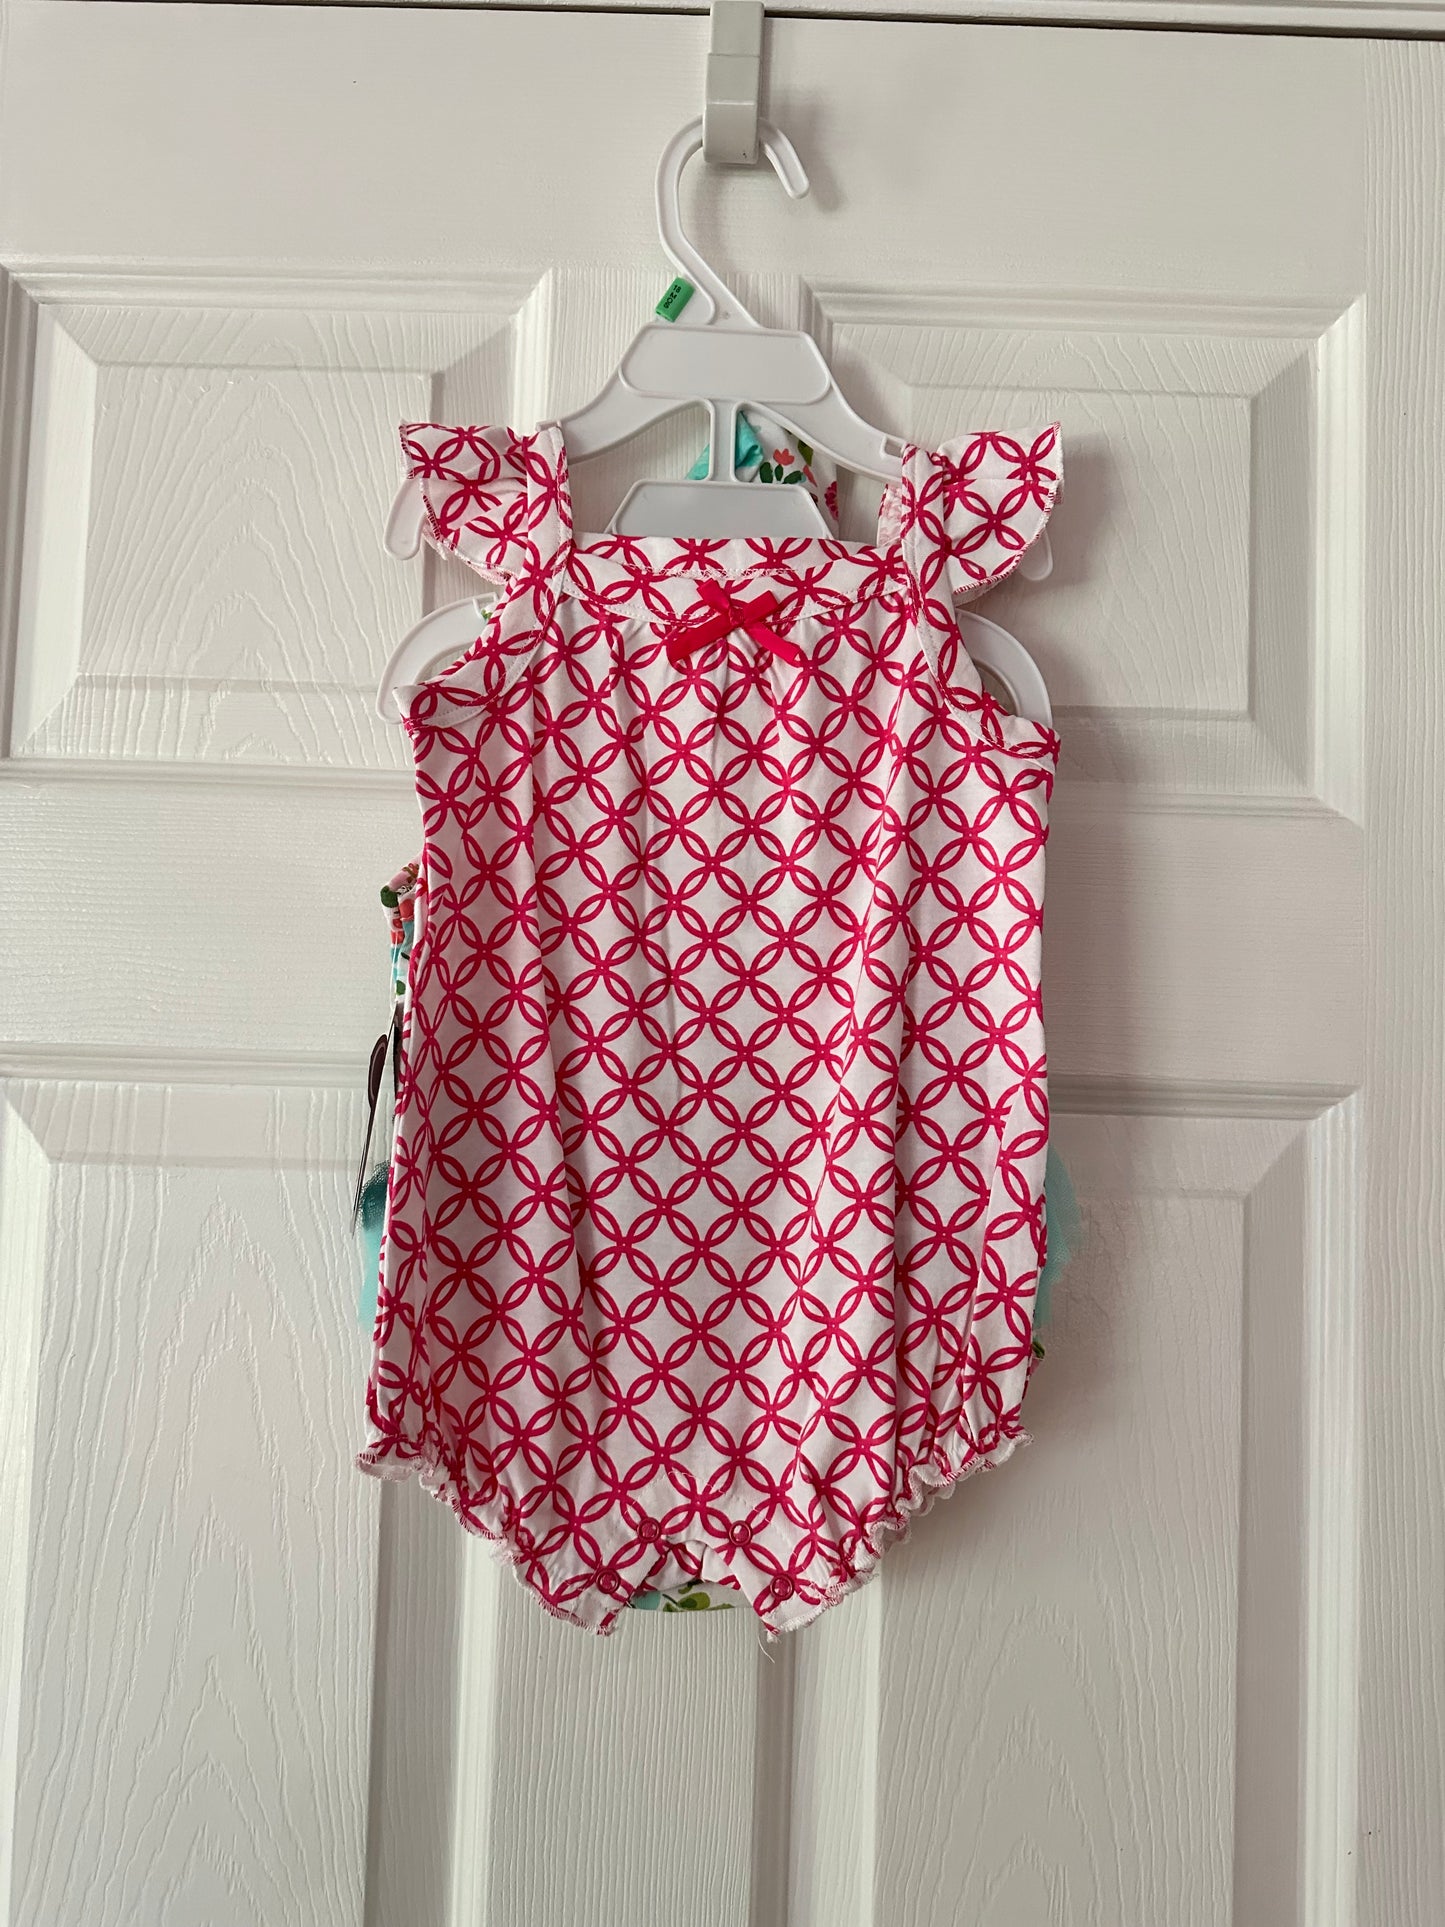 18 Month Girl’s Outfit w/ Bow- NWT